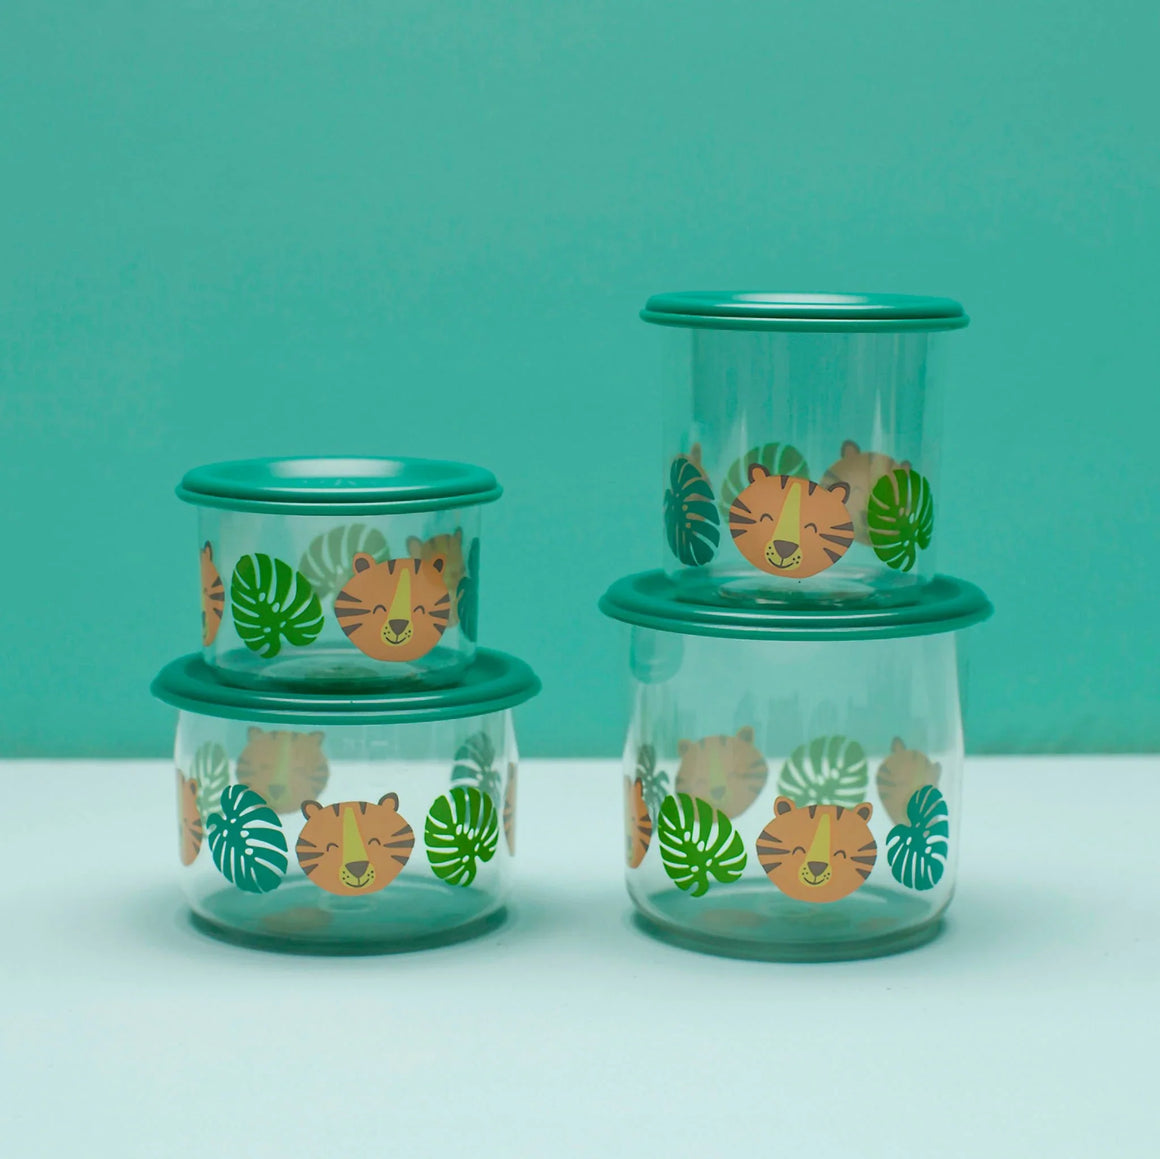 Tiger - Good Lunch Containers - Small 2 pcs